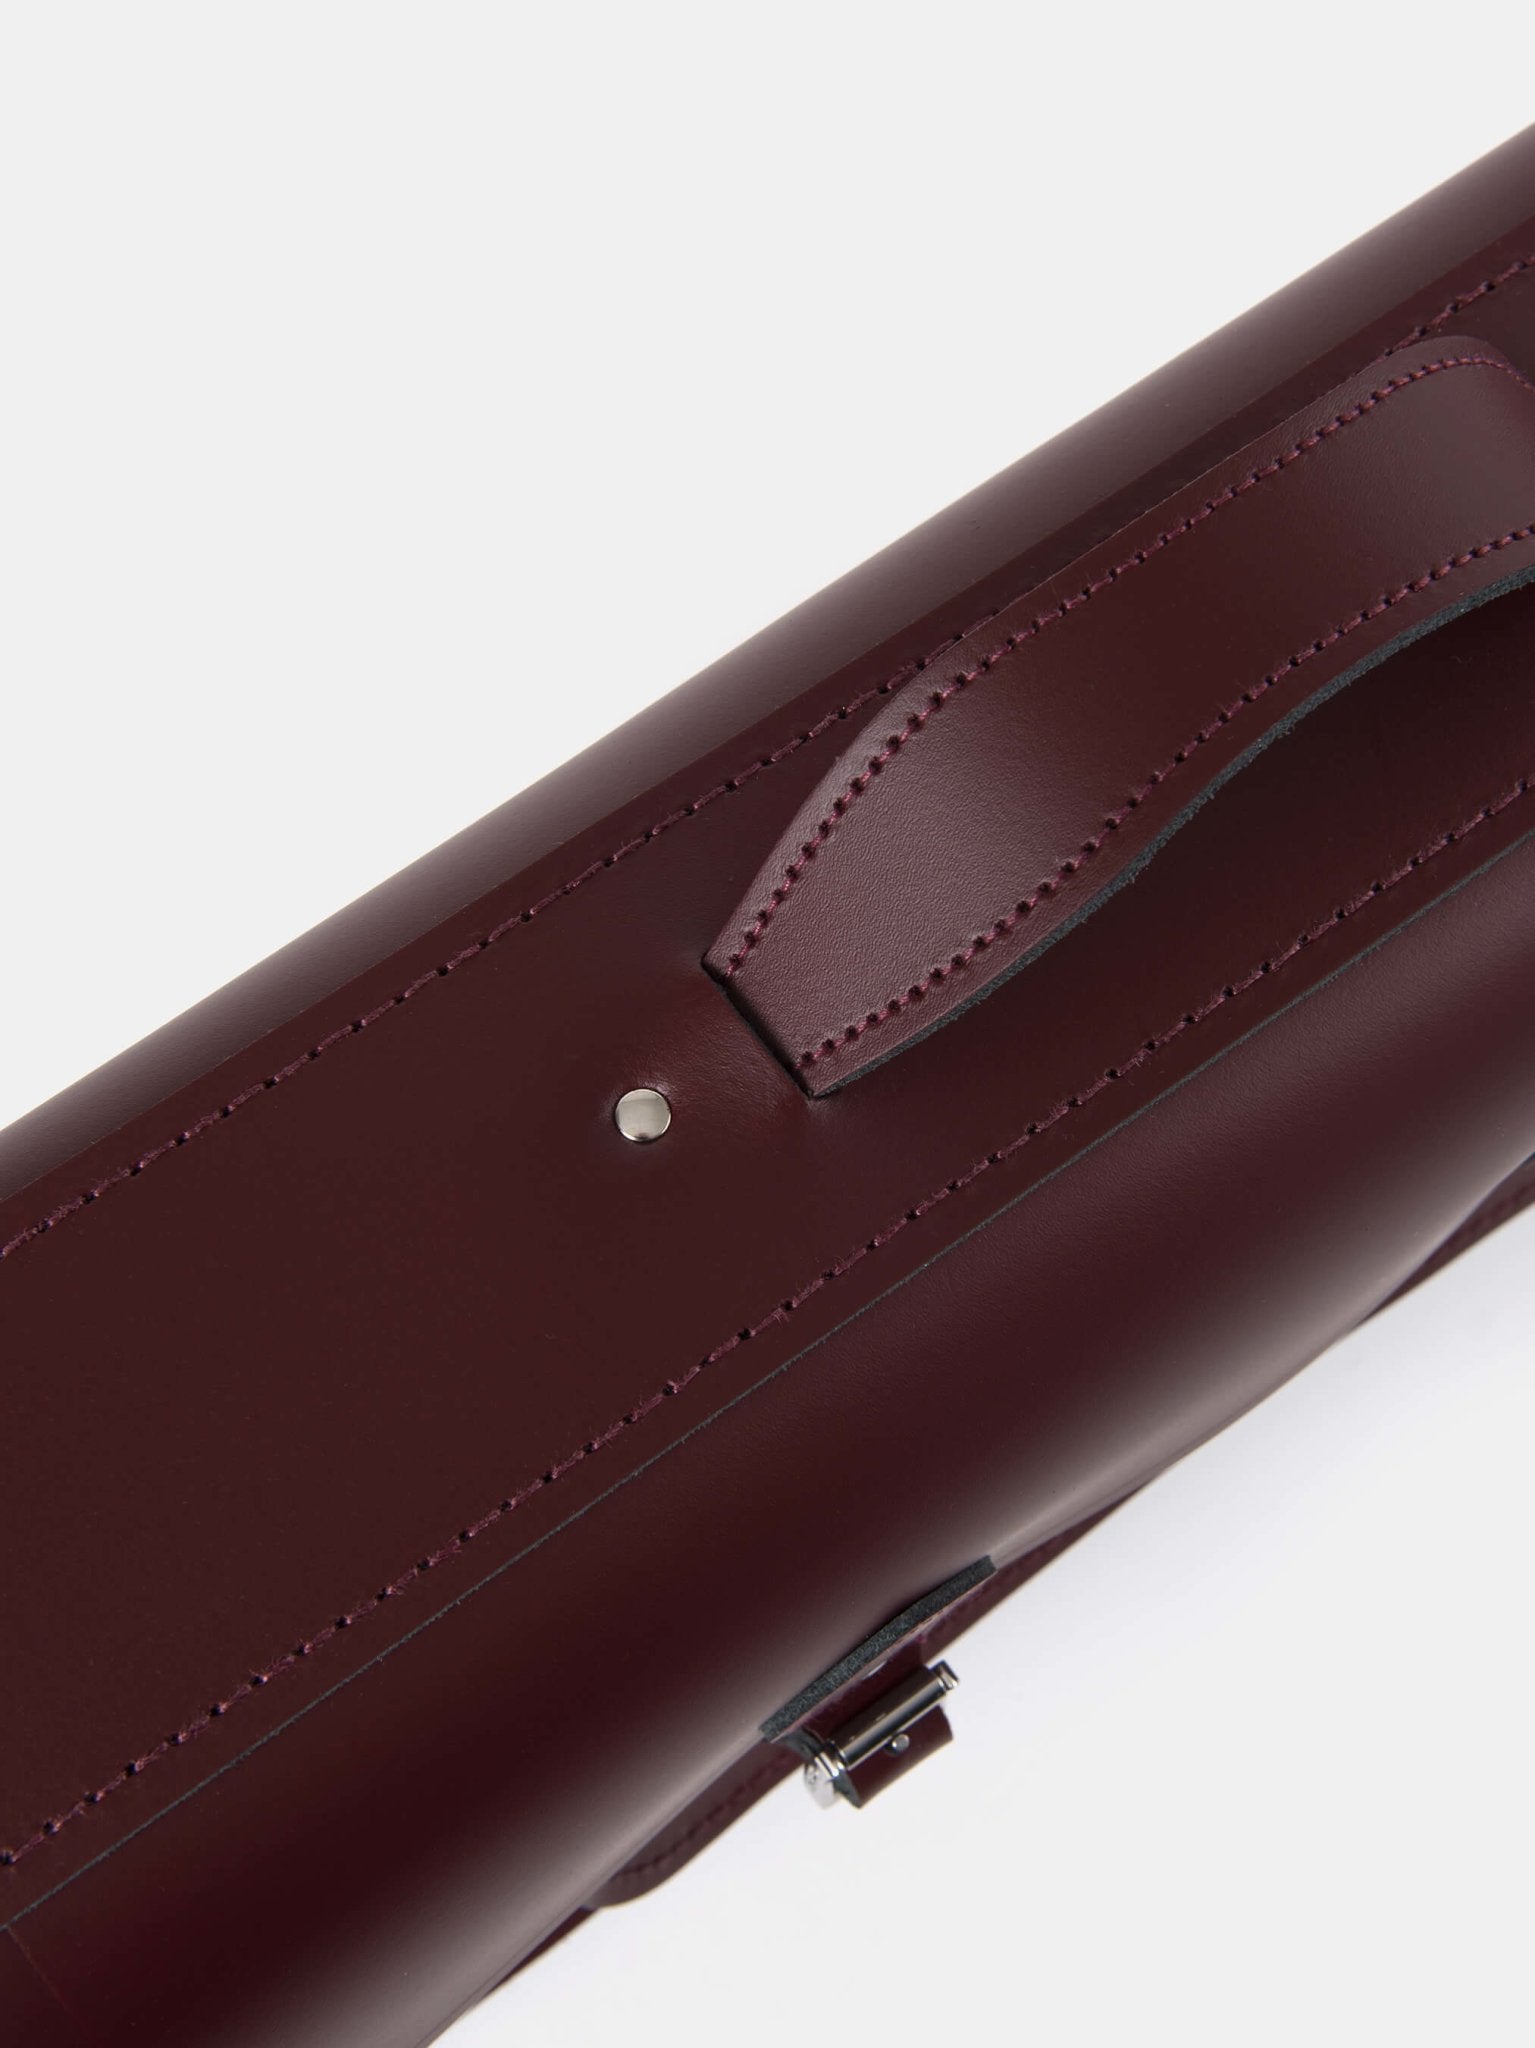 The 16.5 Inch Batchel - Oxblood with Webbing Strap - The Cambridge Satchel Co.